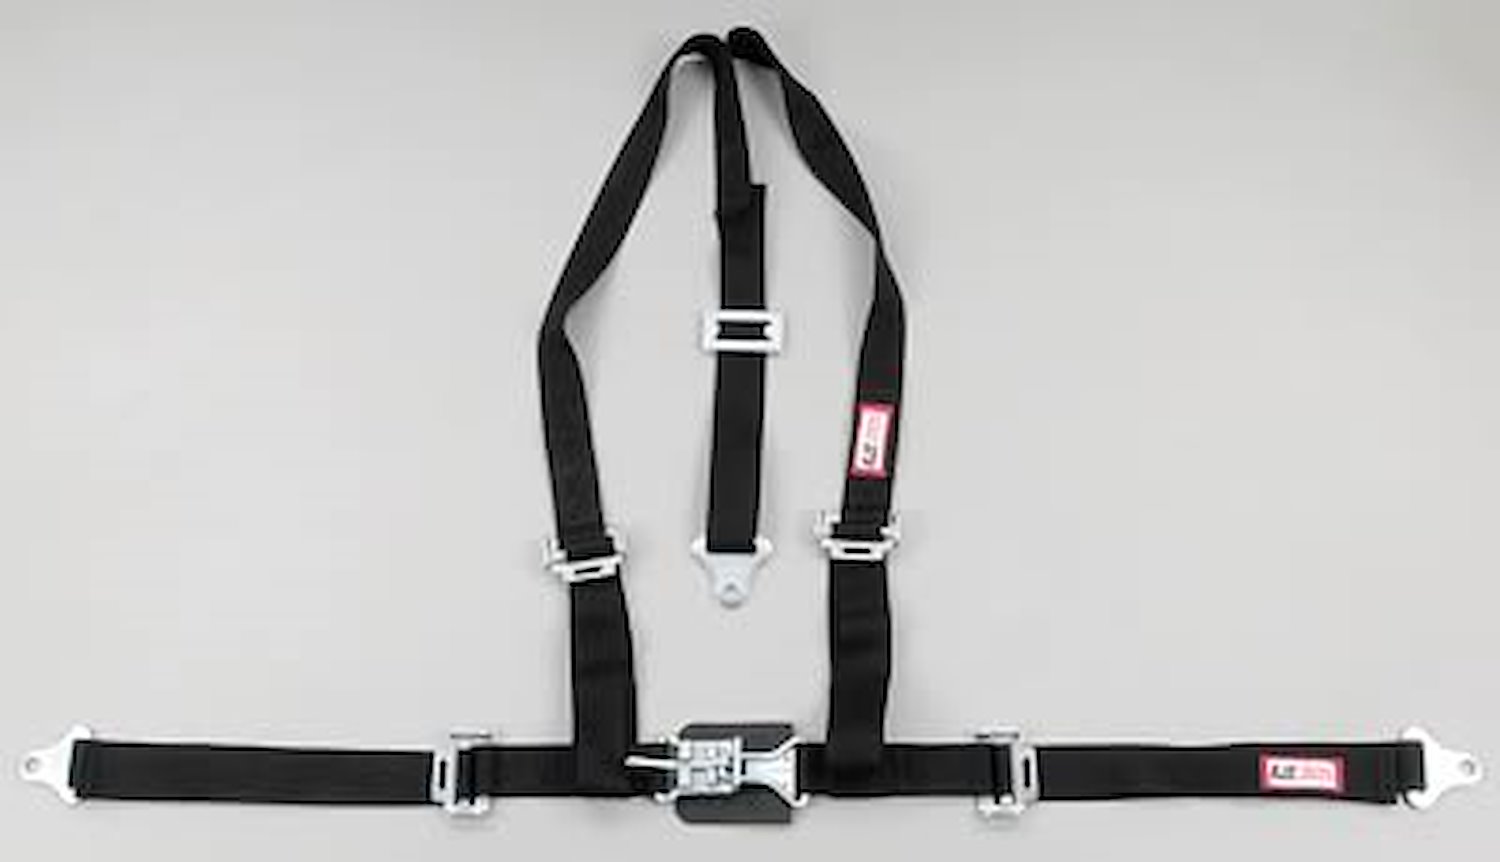 NON-SFI L&L HARNESS 3 PULL UP Lap Belt SNAP SEWN IN 2 S.H. Individual ROLL BAR Mount w/STERNUM STRAP WRAP/BOLT BLACK